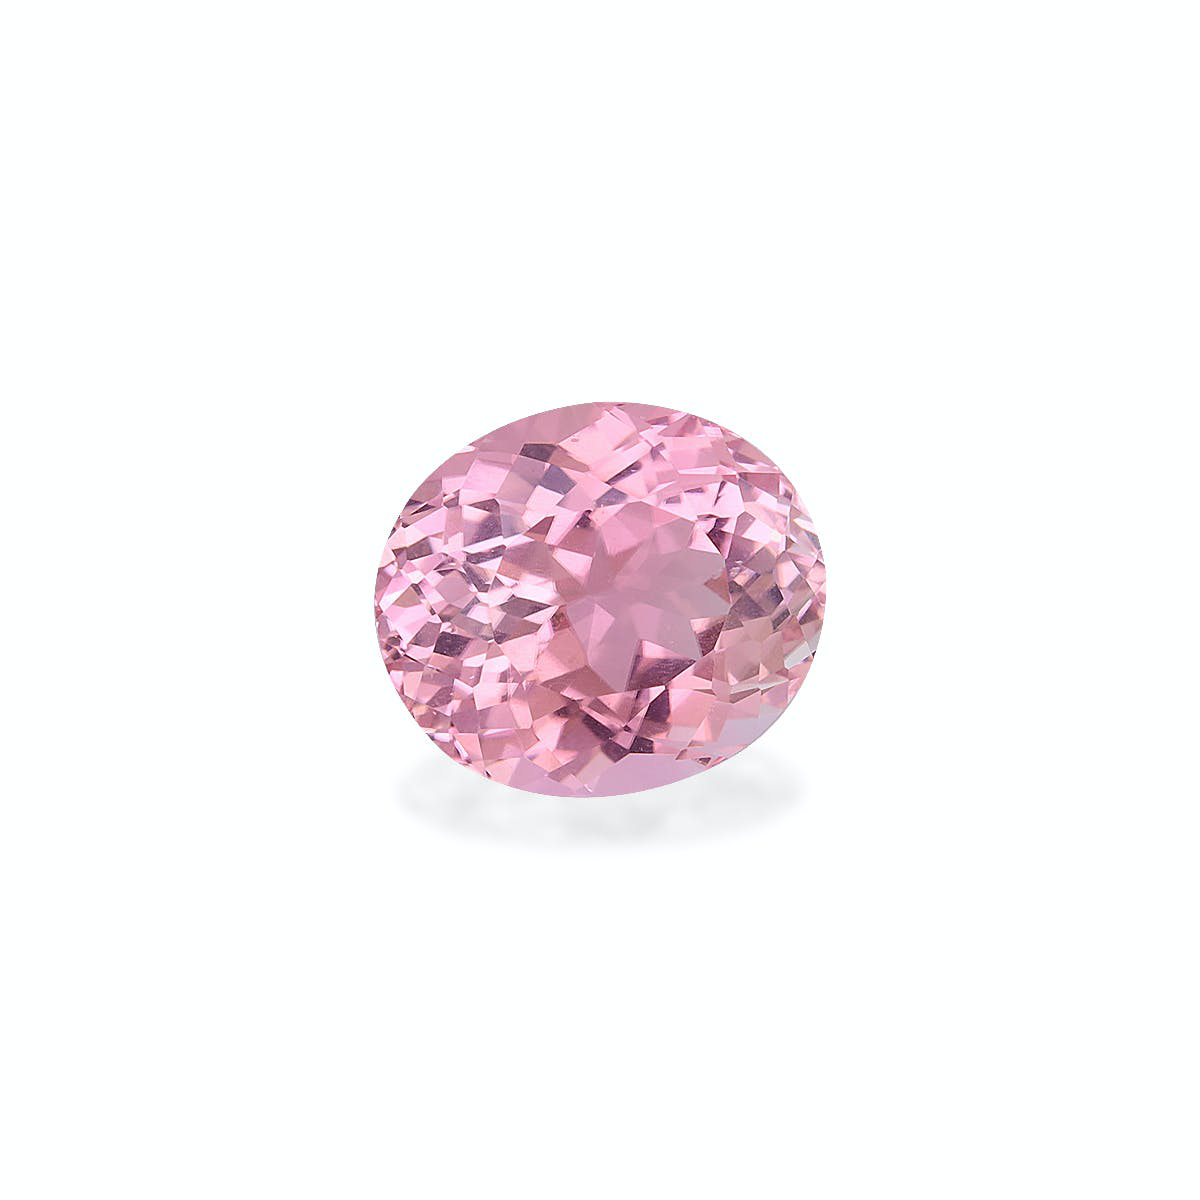 Picture of Flower Pink Tourmaline 5.33ct (PT1265)